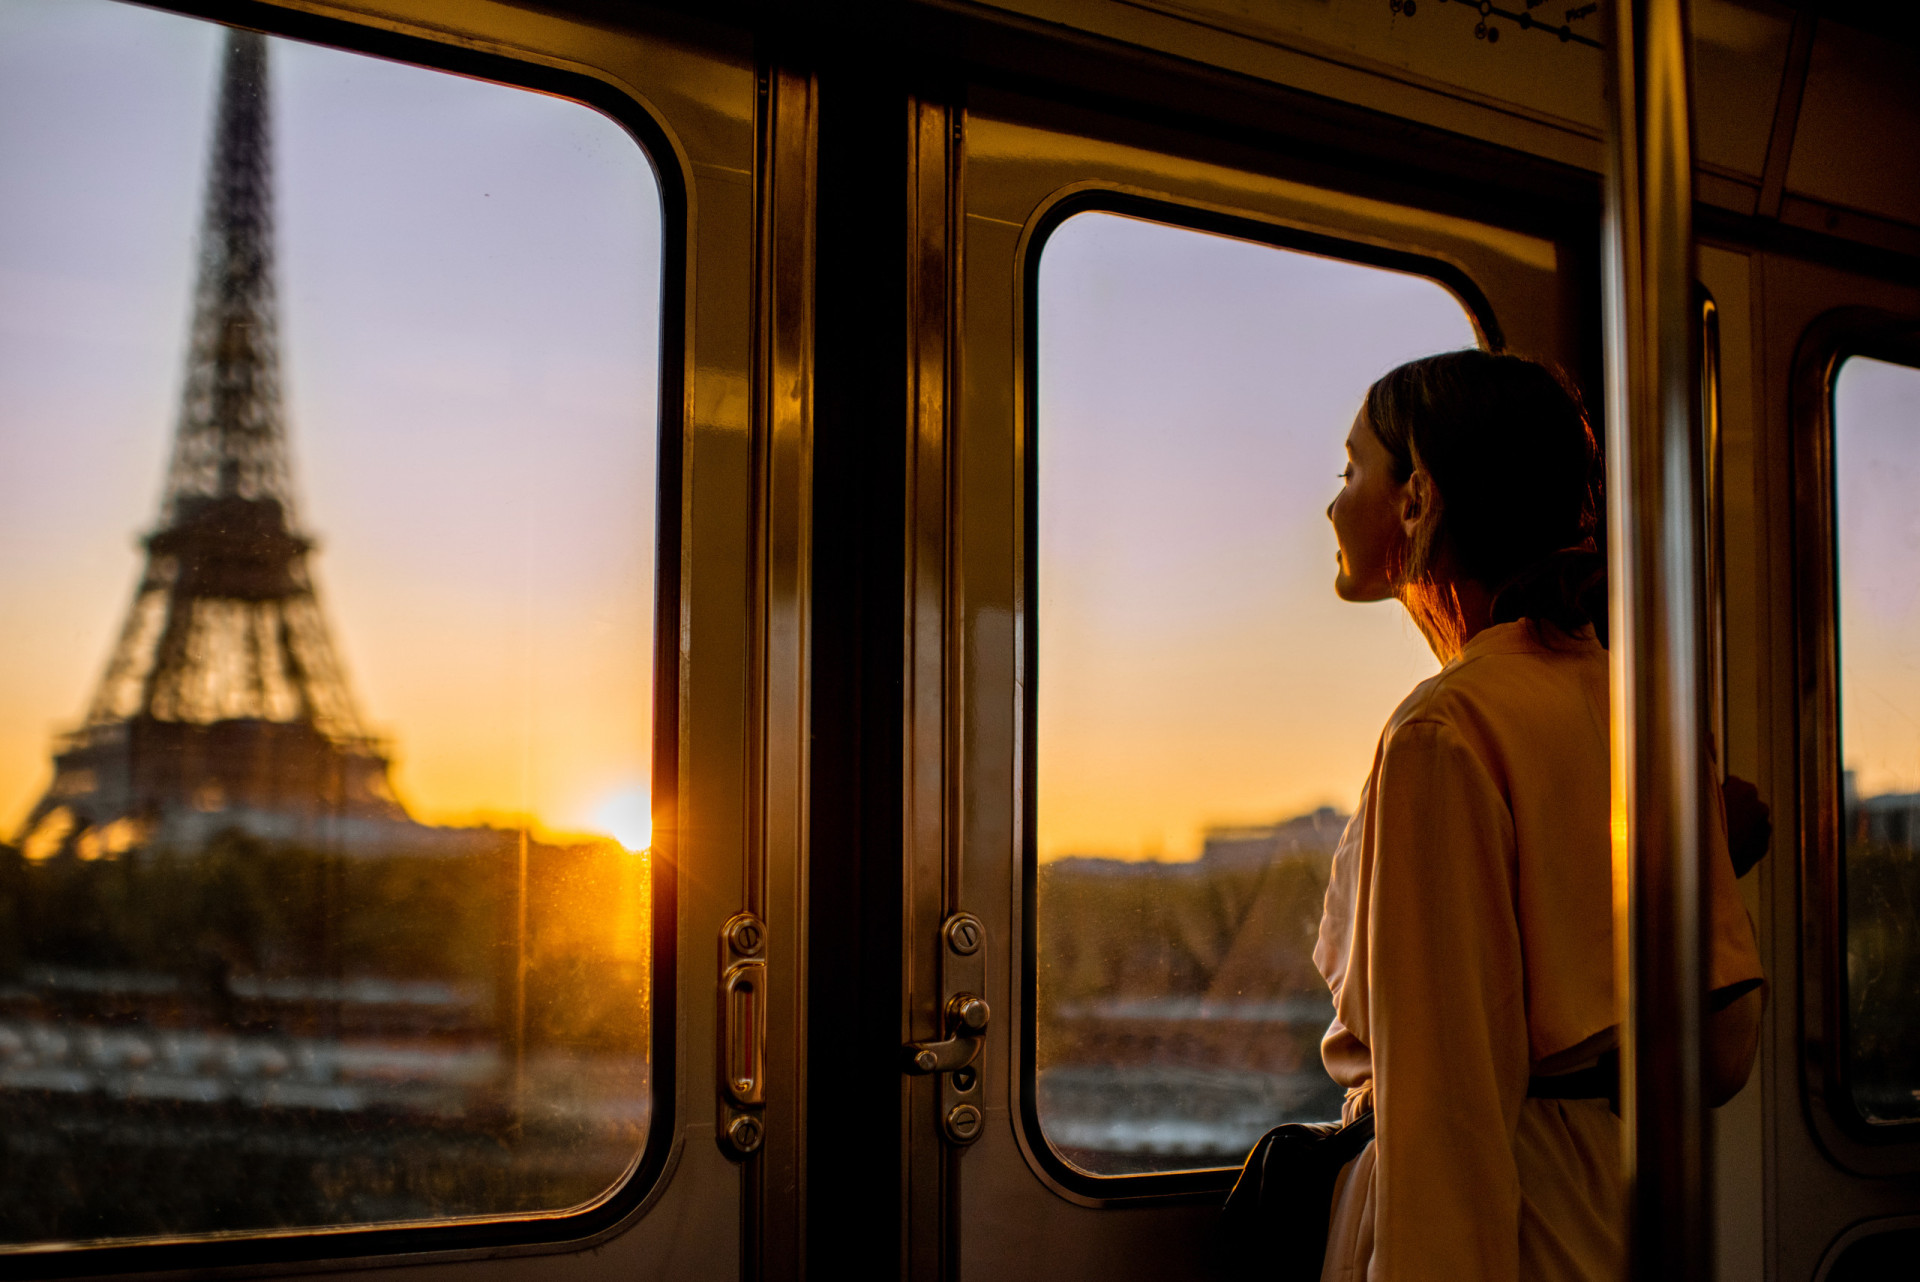 <p>The Paris metro is the fastest and smoothest way of getting around Paris. And if you're lucky, you might find an empty wagon.</p><p><a href="https://www.msn.com/en-us/community/channel/vid-7xx8mnucu55yw63we9va2gwr7uihbxwc68fxqp25x6tg4ftibpra?cvid=94631541bc0f4f89bfd59158d696ad7e">Follow us and access great exclusive content every day</a></p>